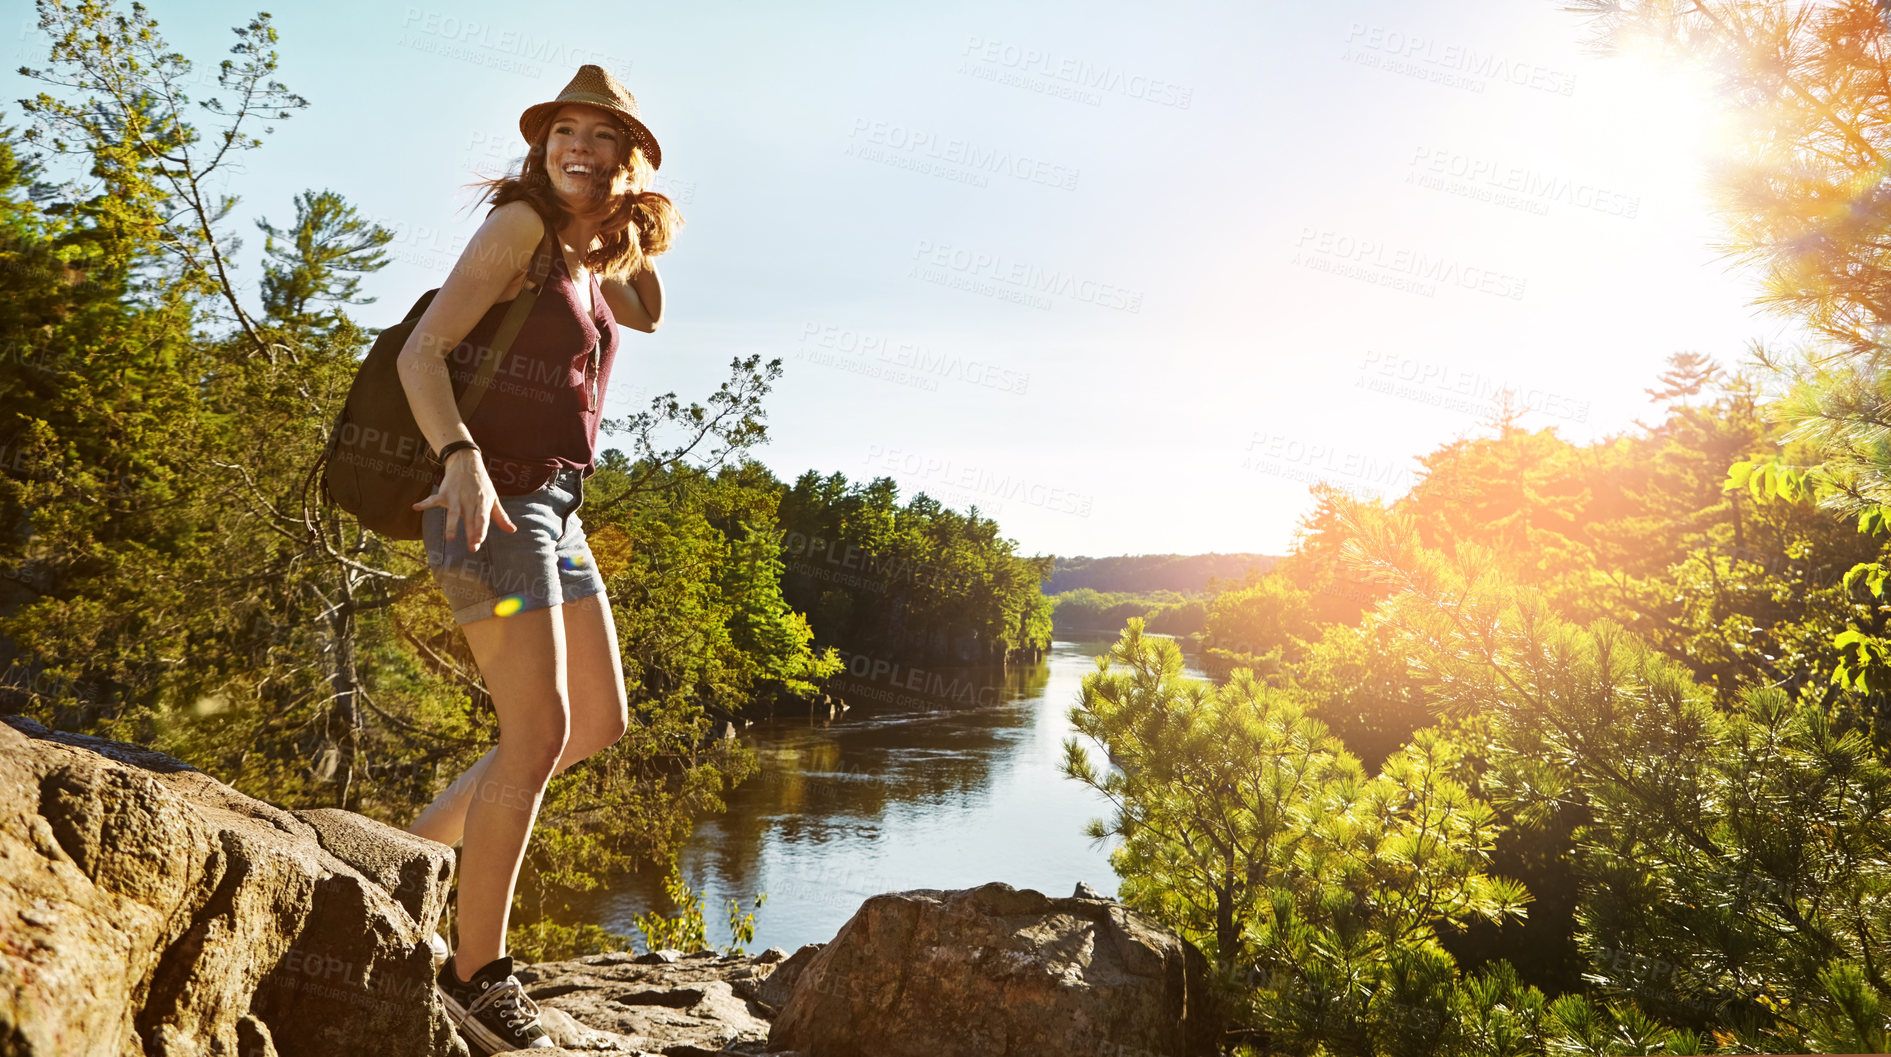 Buy stock photo Shot of a young woman out hiking